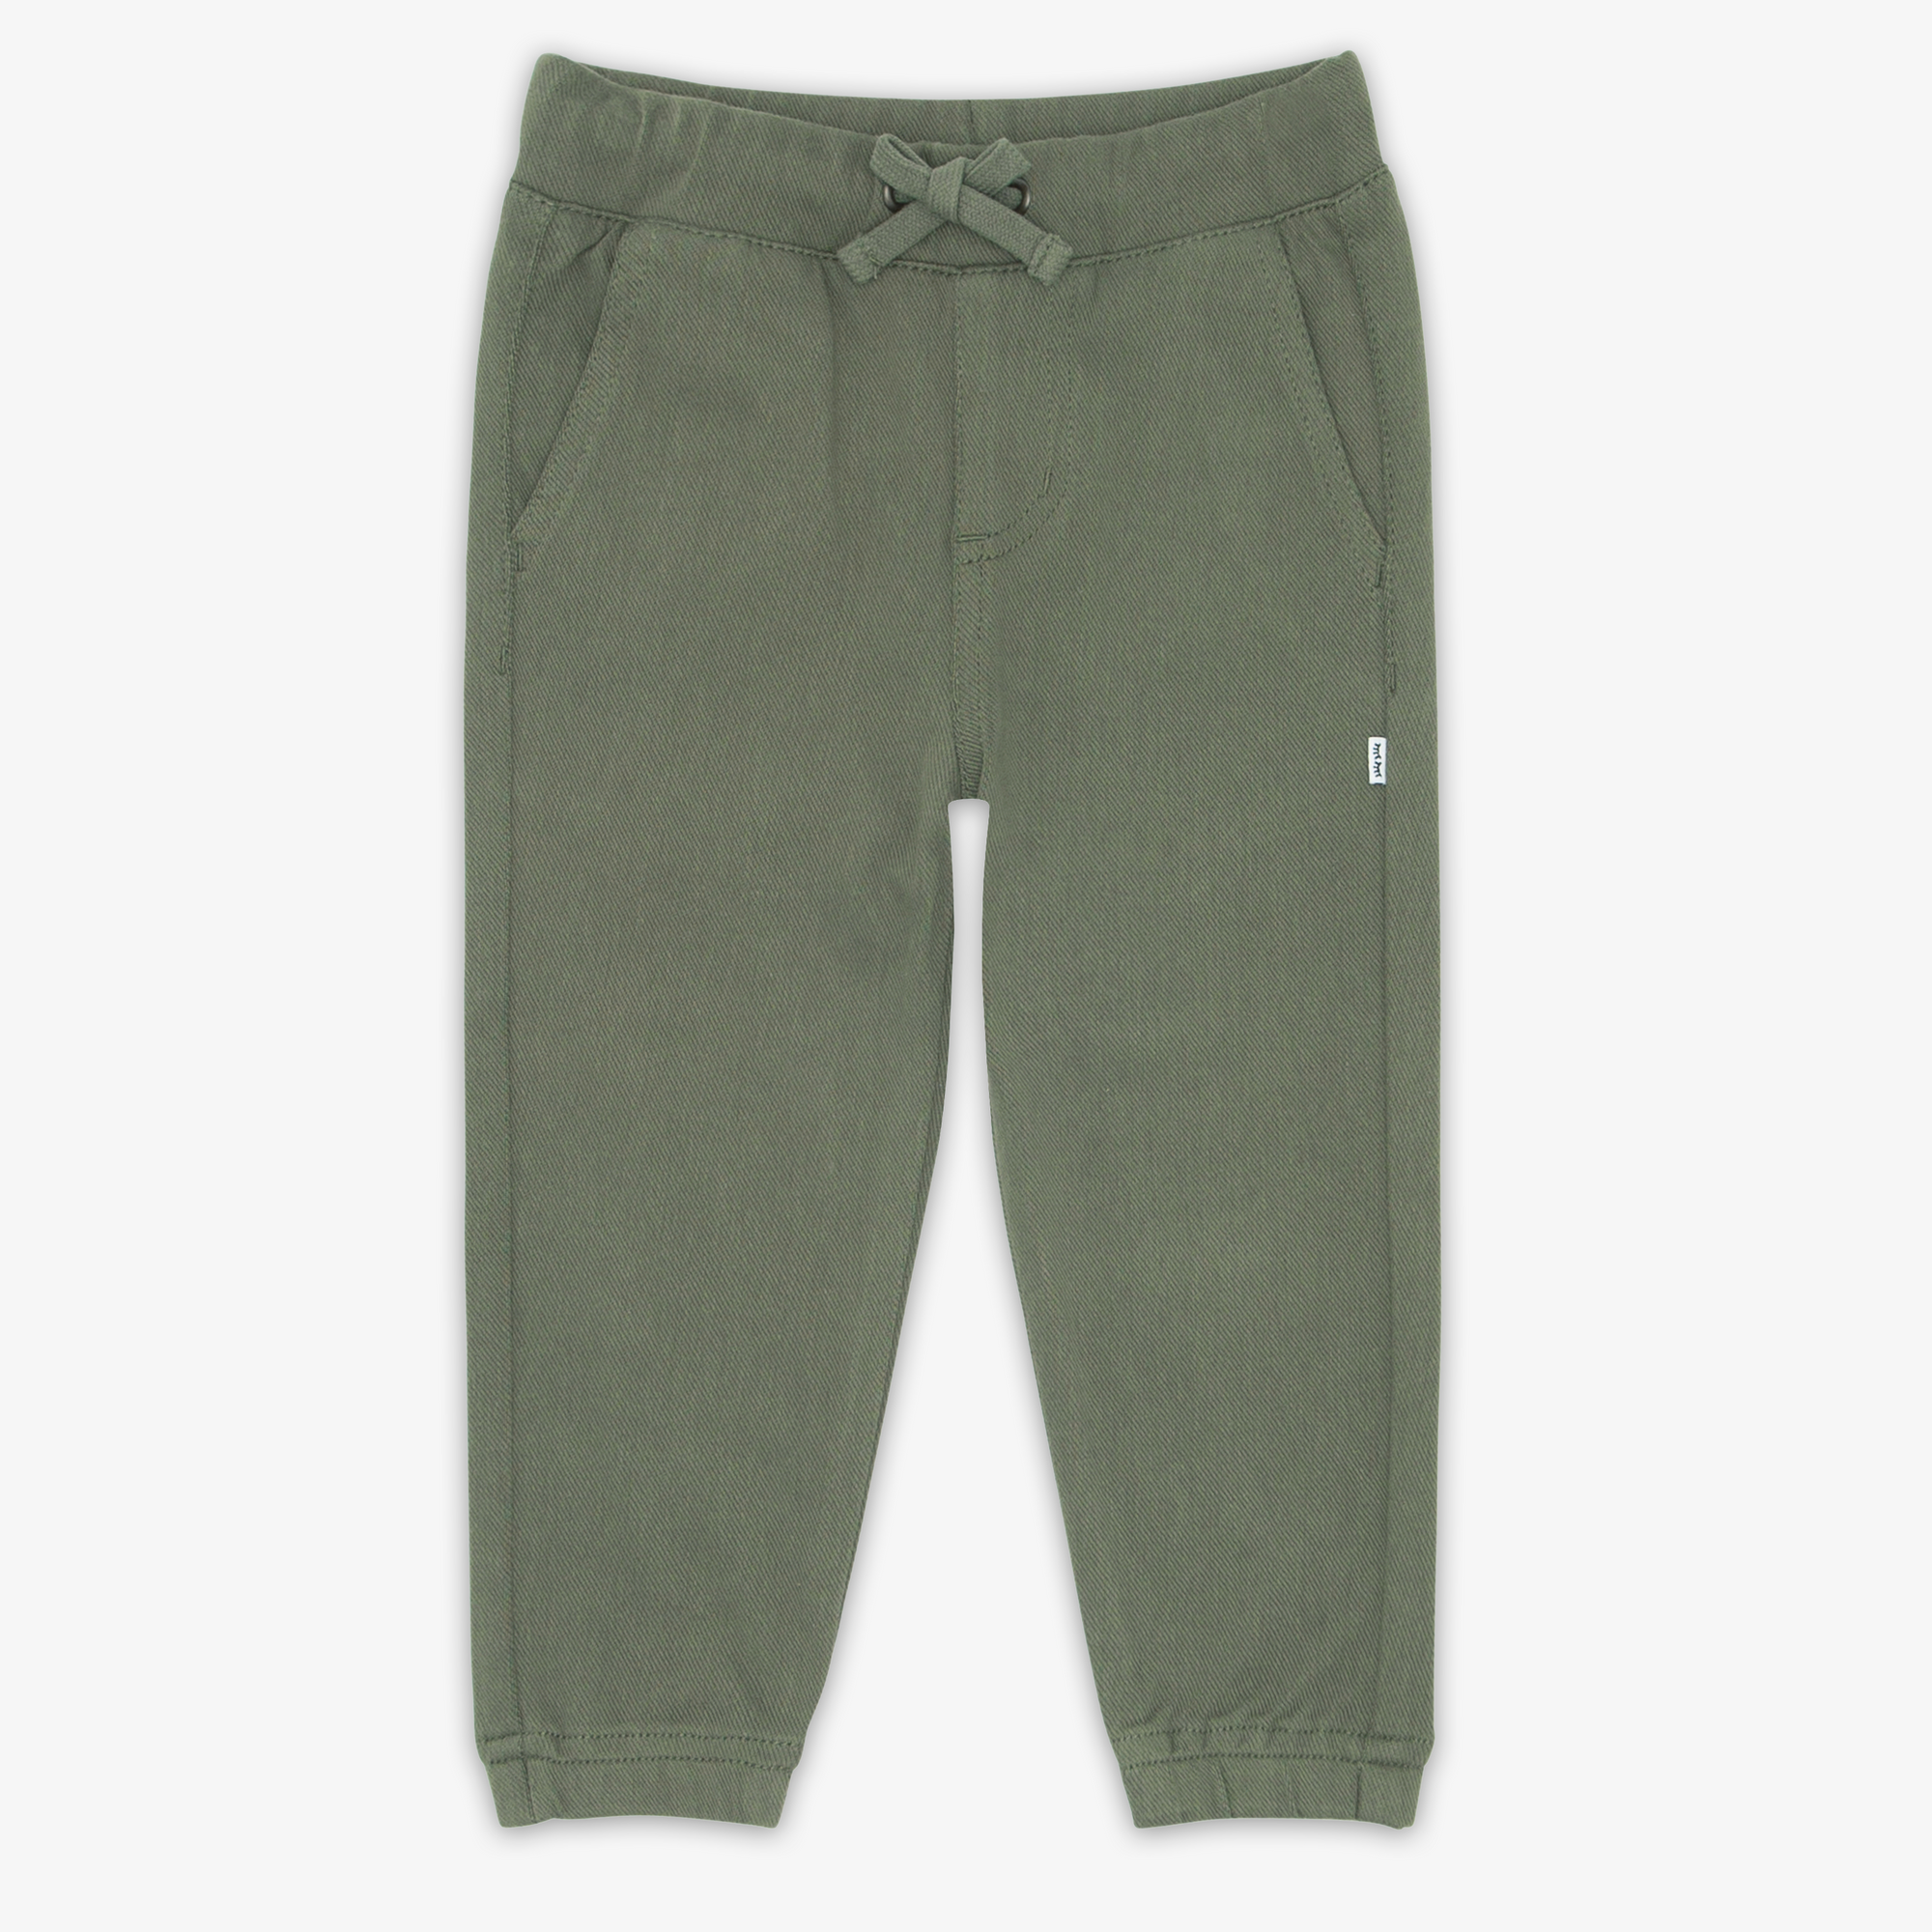 Flat lay image of the Olive Denim Jogger